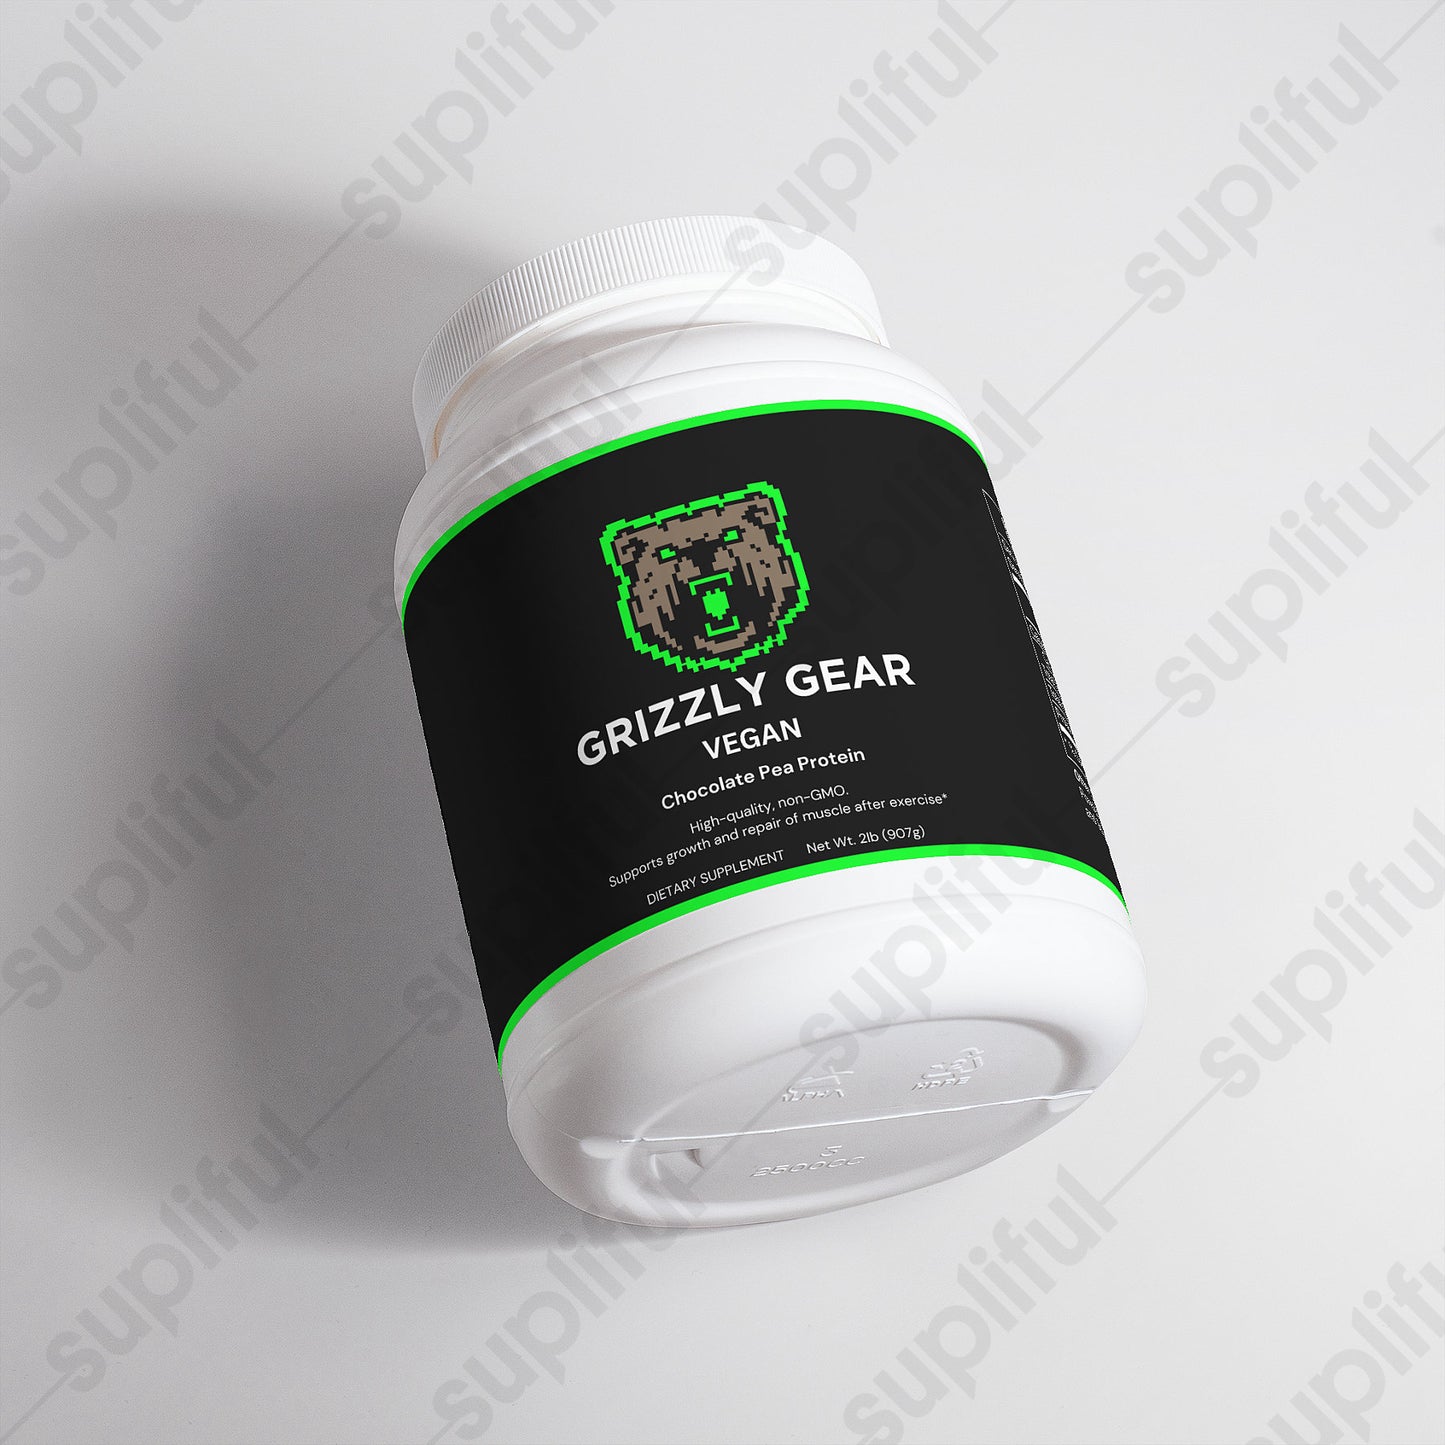 Grizzly Gear Vegan Protein(Chocolate)